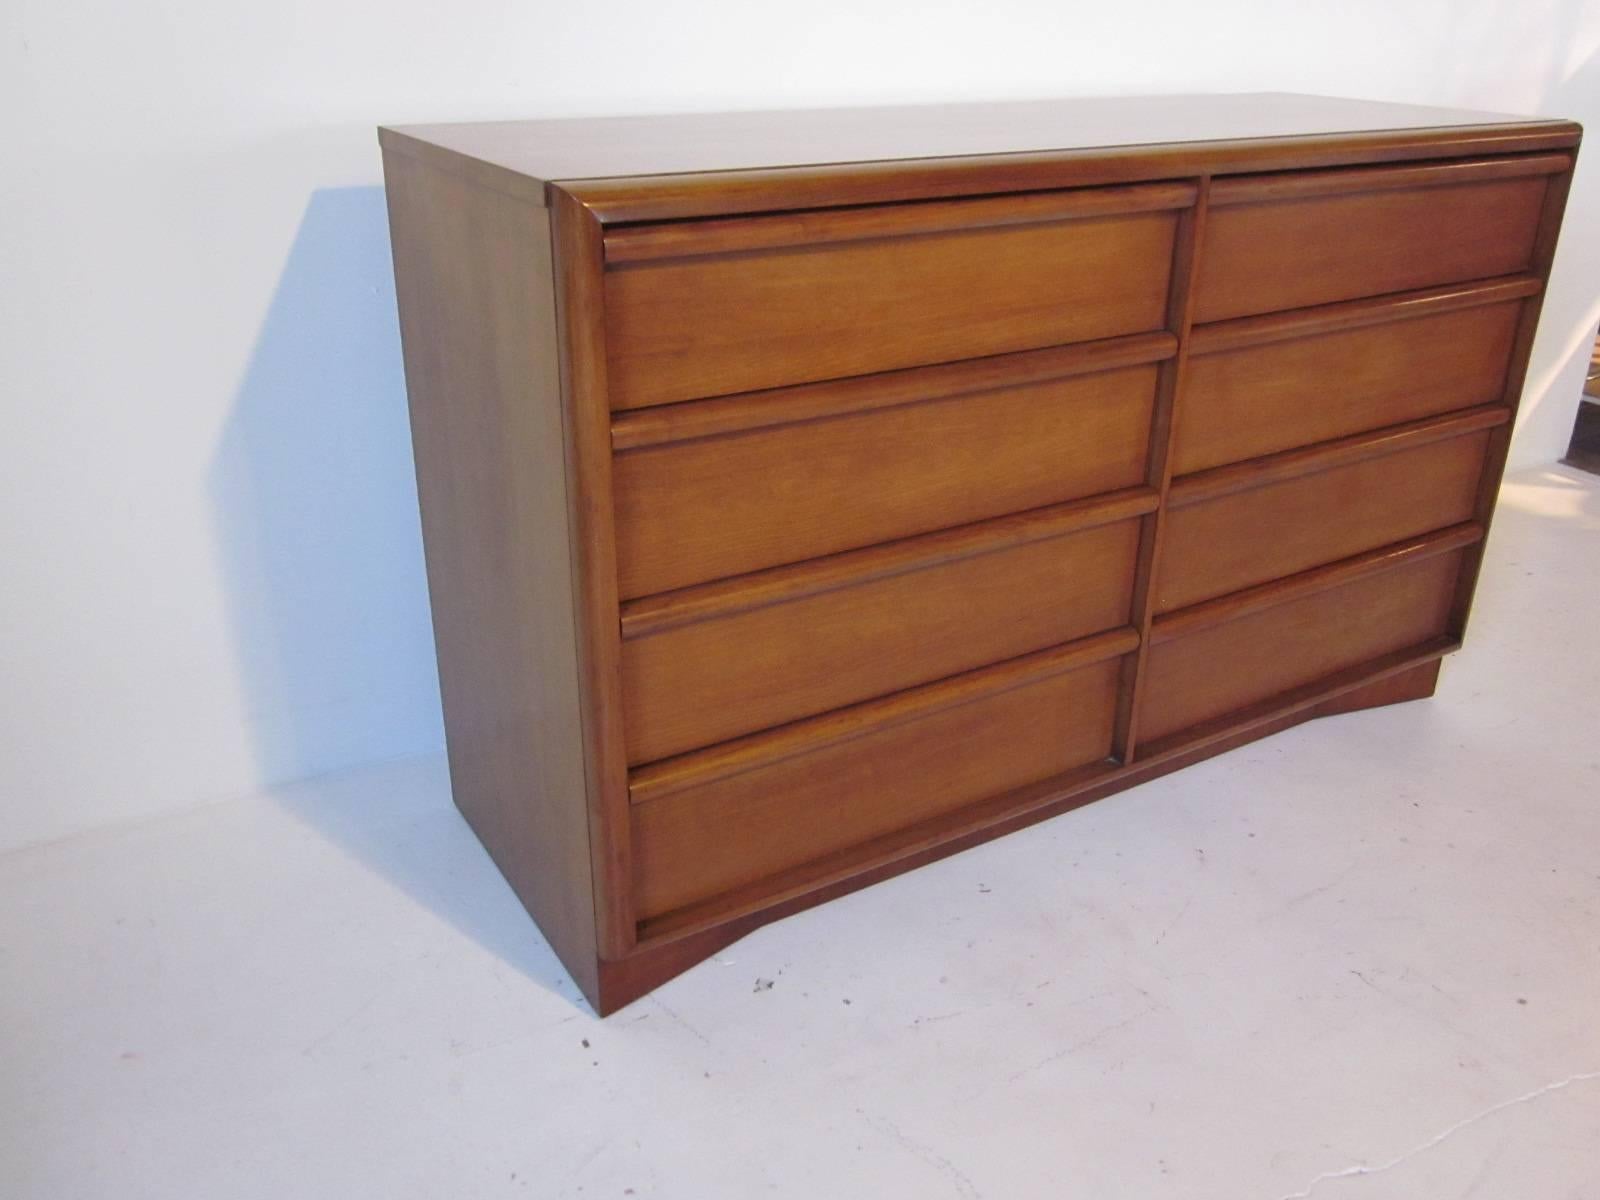 A eight drawer dresser in the manner of T.H. Robsjohn-Gibbings and Widdicomb with a medium dark honey finish true to this style, long pulls to the top of each drawer and curved kick base give it a light feel.